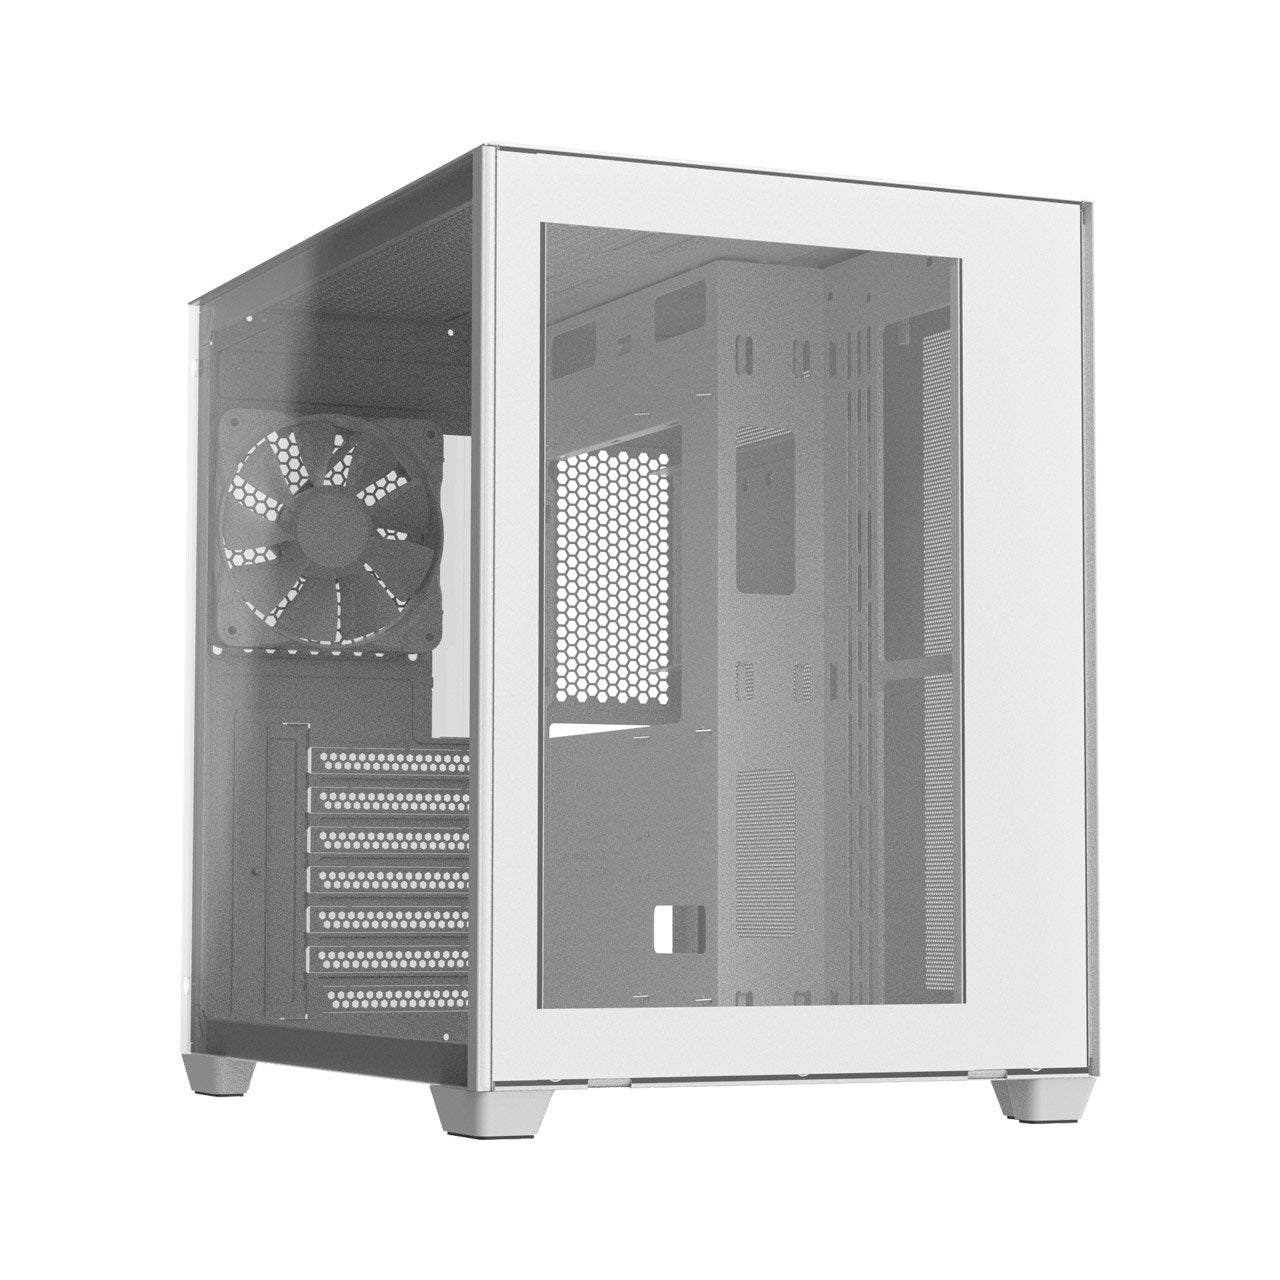 FSP CMT380W ATX Gaming Chassis Tempered Glass side panel – White